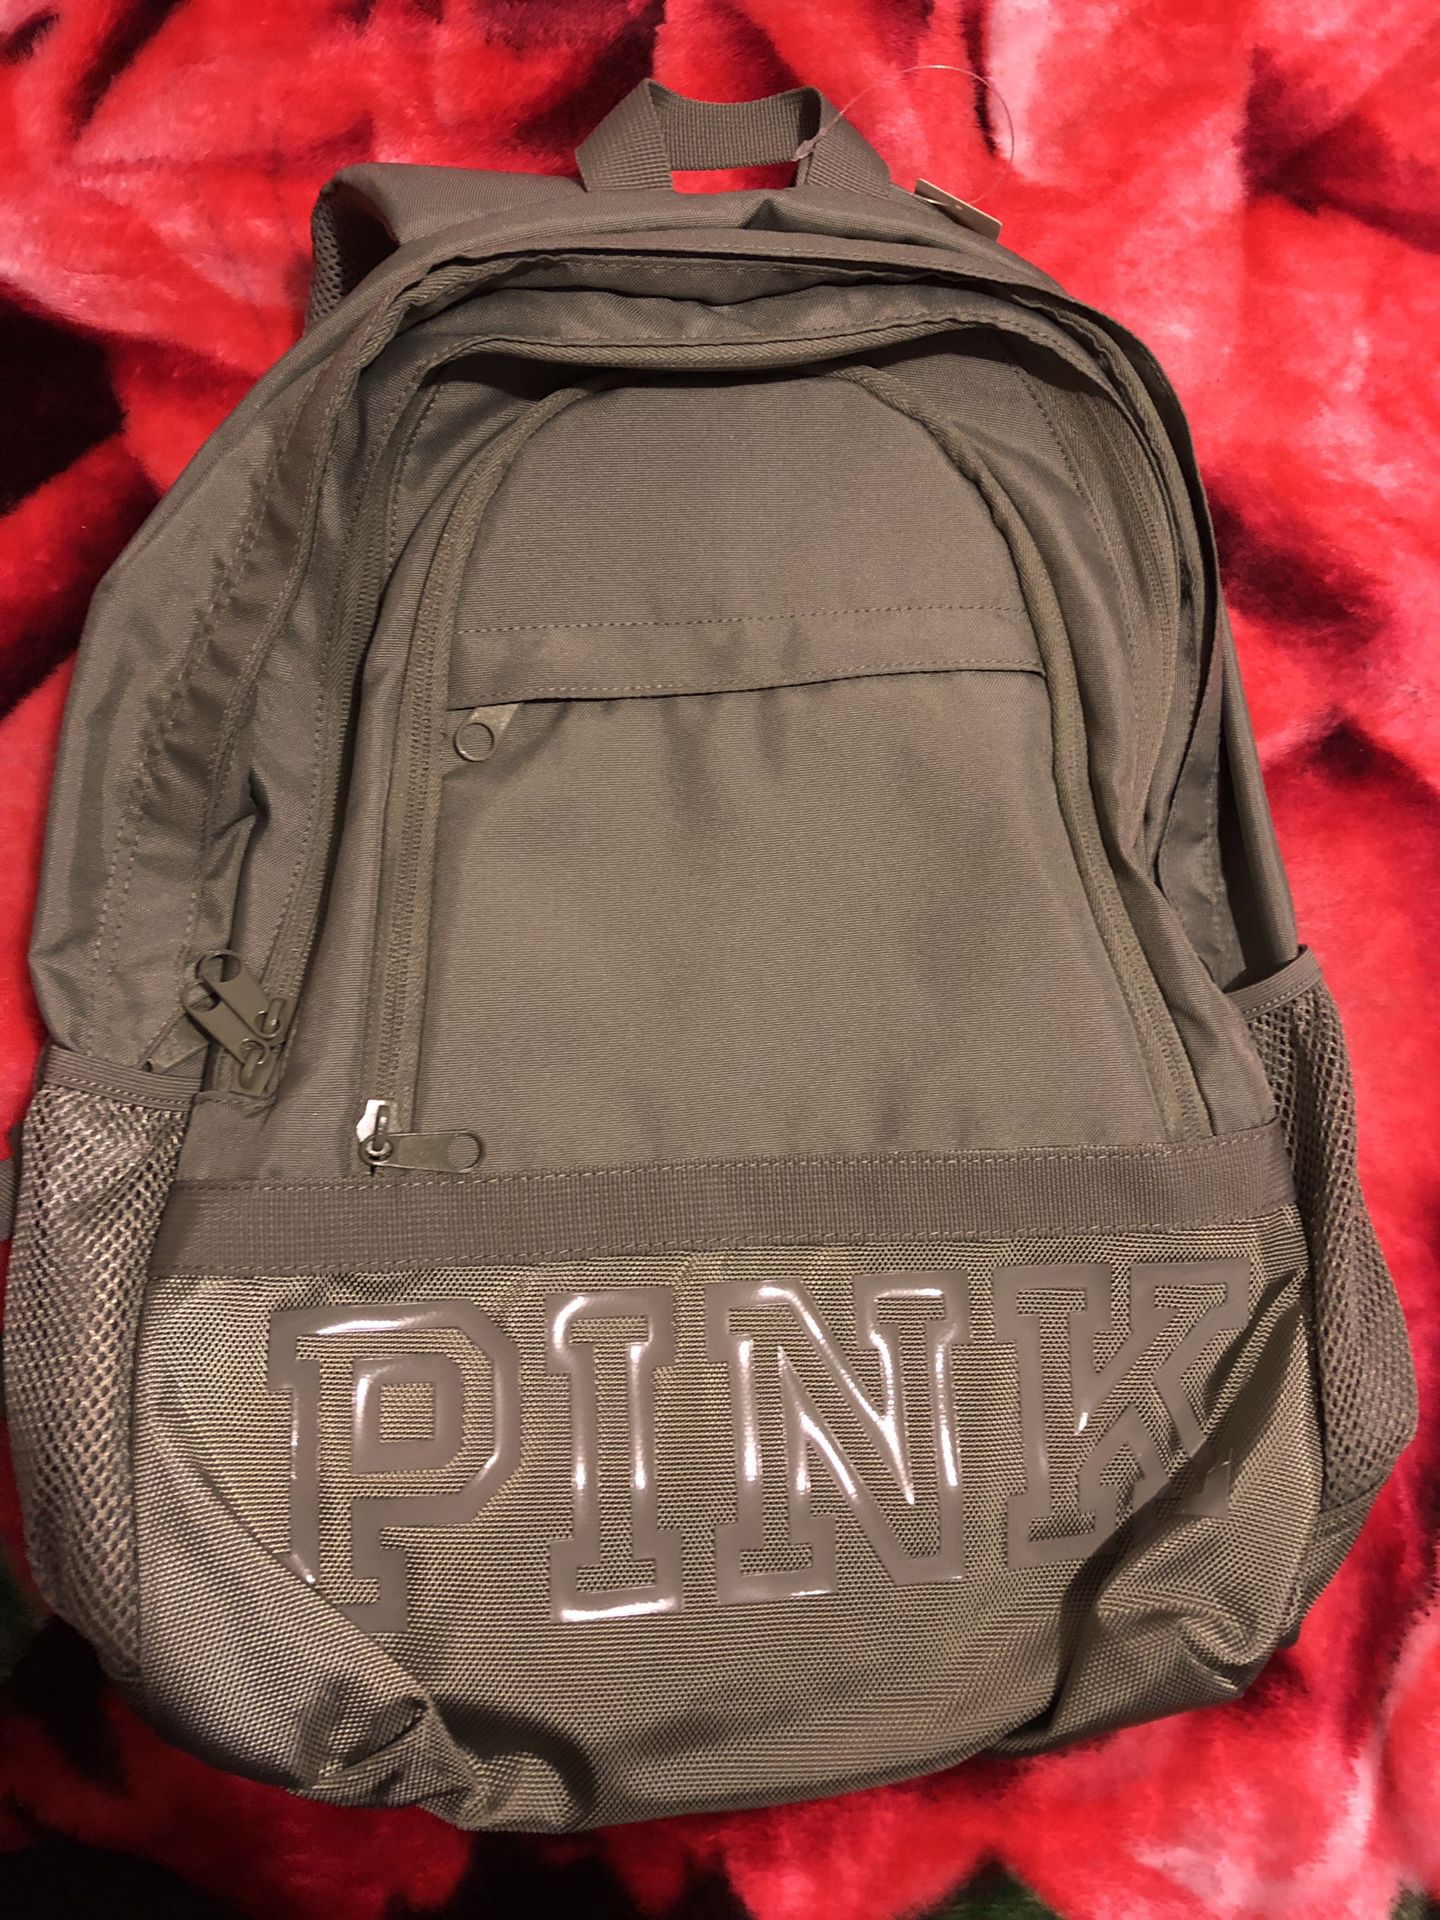 VS PINK BACKPACK $25 Firm New with tag